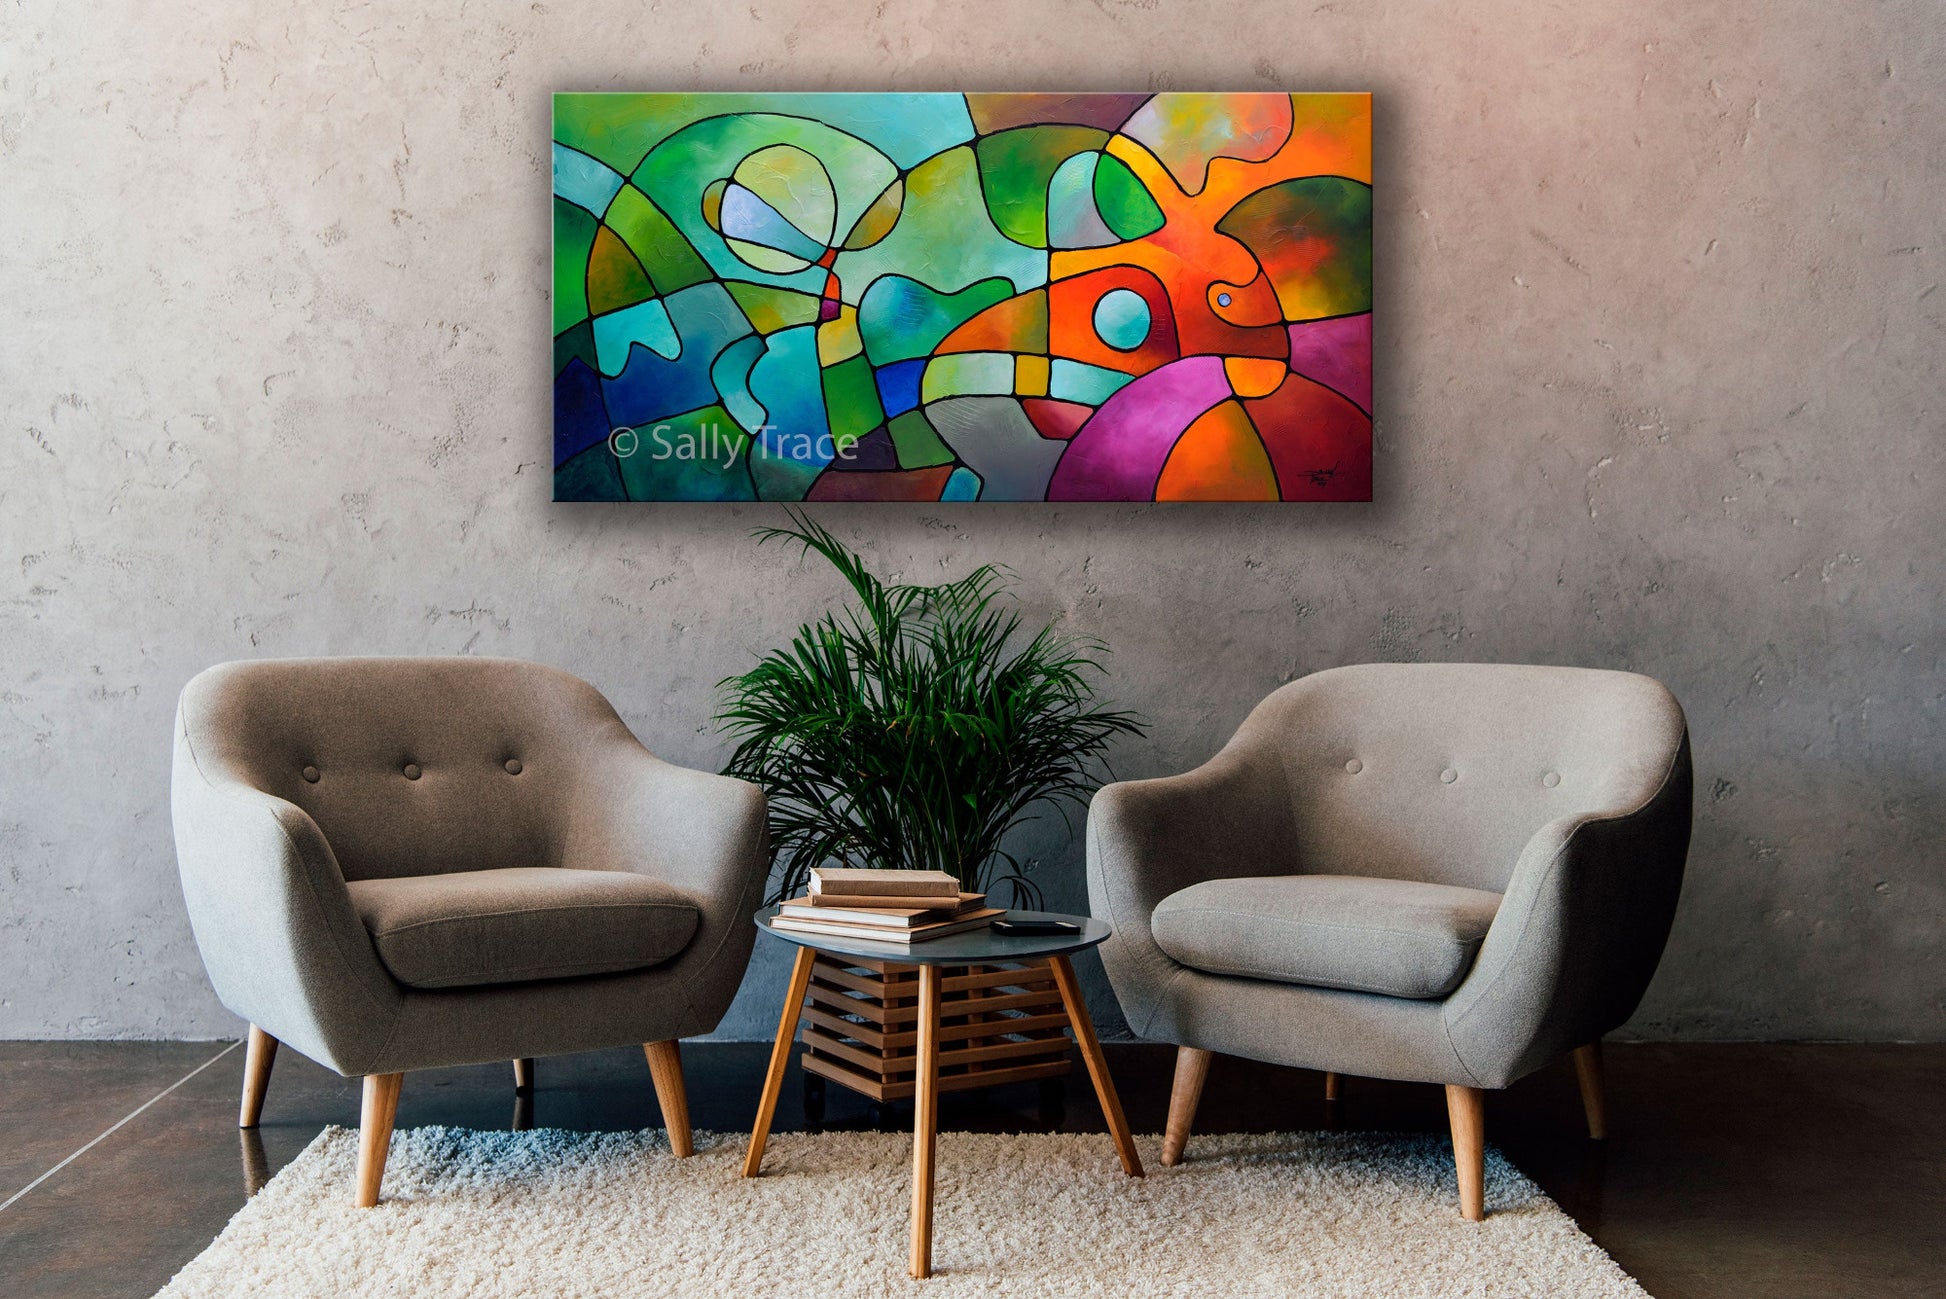 Colorful geometric abstract art acrylic painting on canvas for sale, "Equanimity", a lightly textured geometric abstract painting with a mid-century modern aesthetic, meandering lines, geometric elements. A geometric textured abstract painting, room view